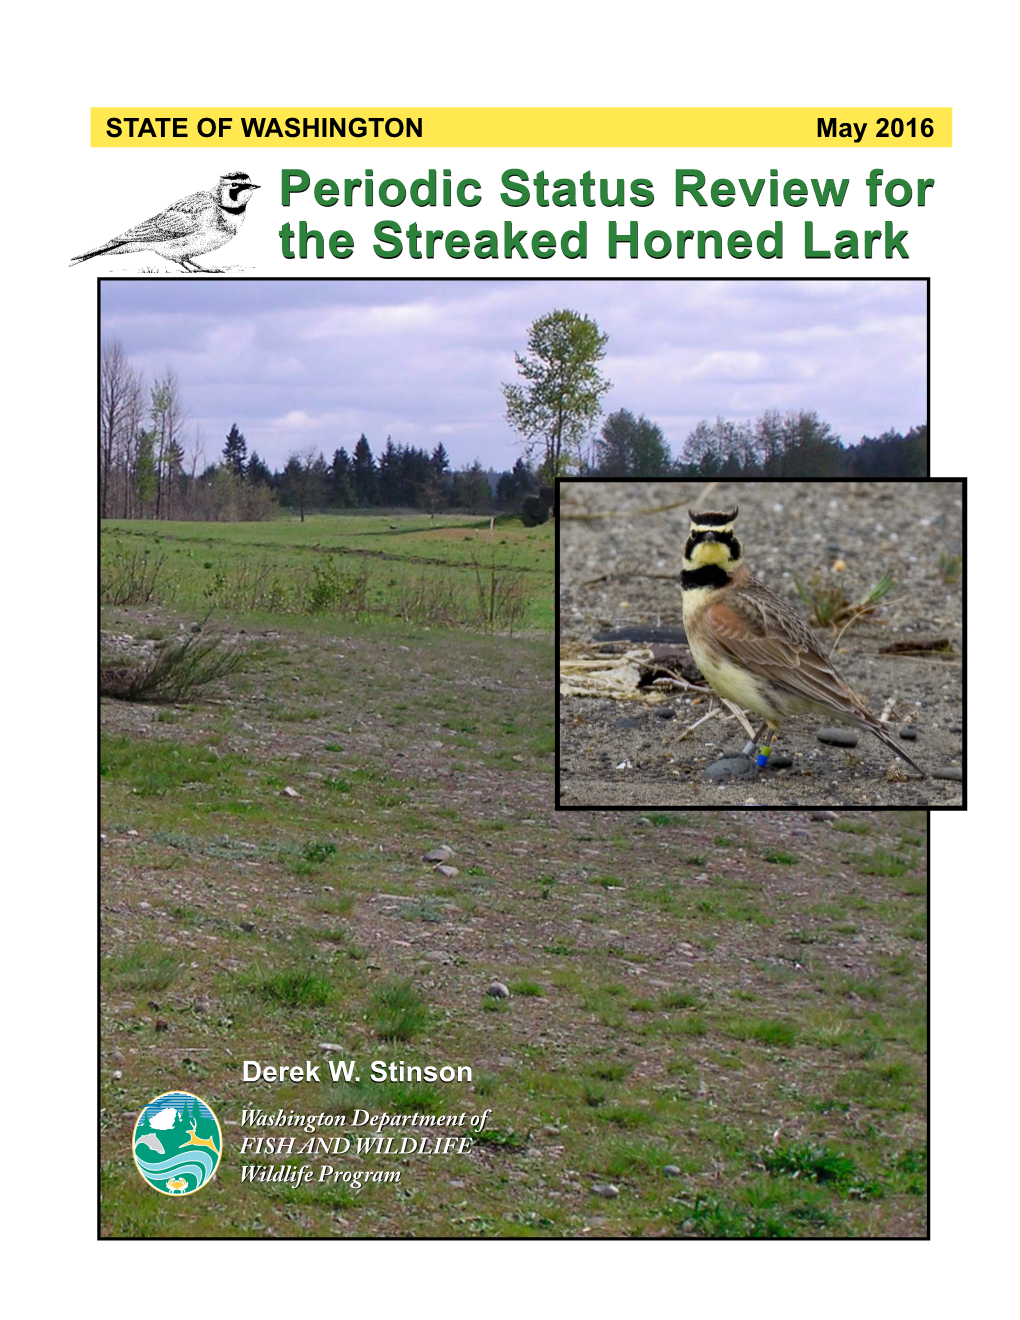 Periodic Status Review for the Streaked Horned Lark